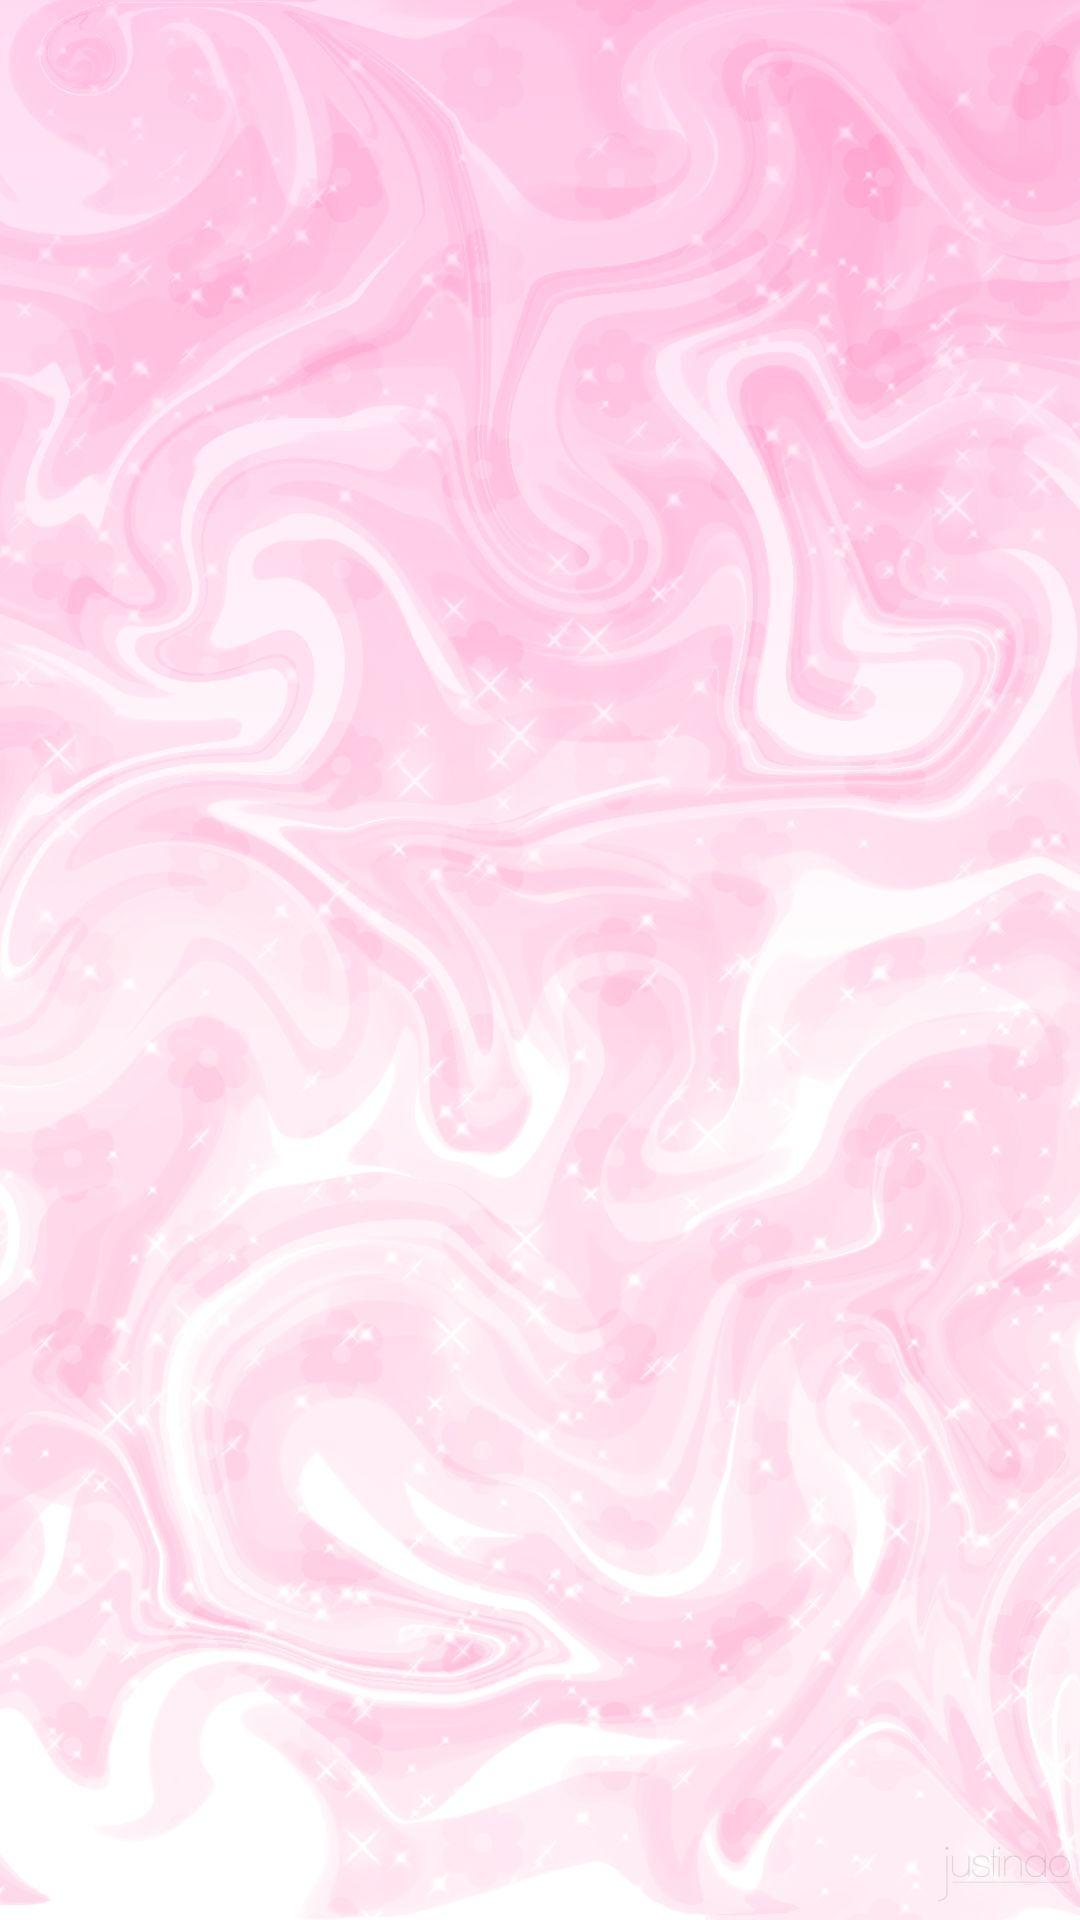 soft pink background 9. Background Check All